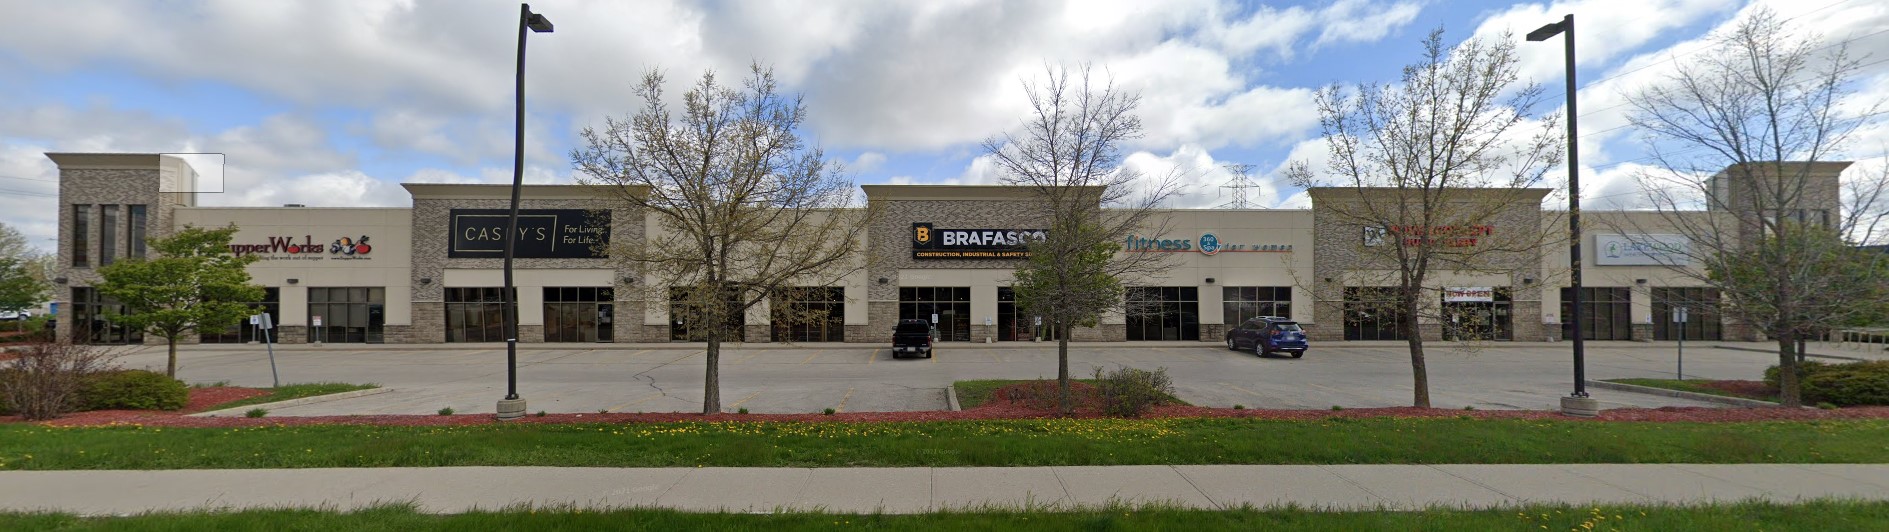 283-291 Northfield Drive E, Waterloo | Prime Retail Units Available for Lease